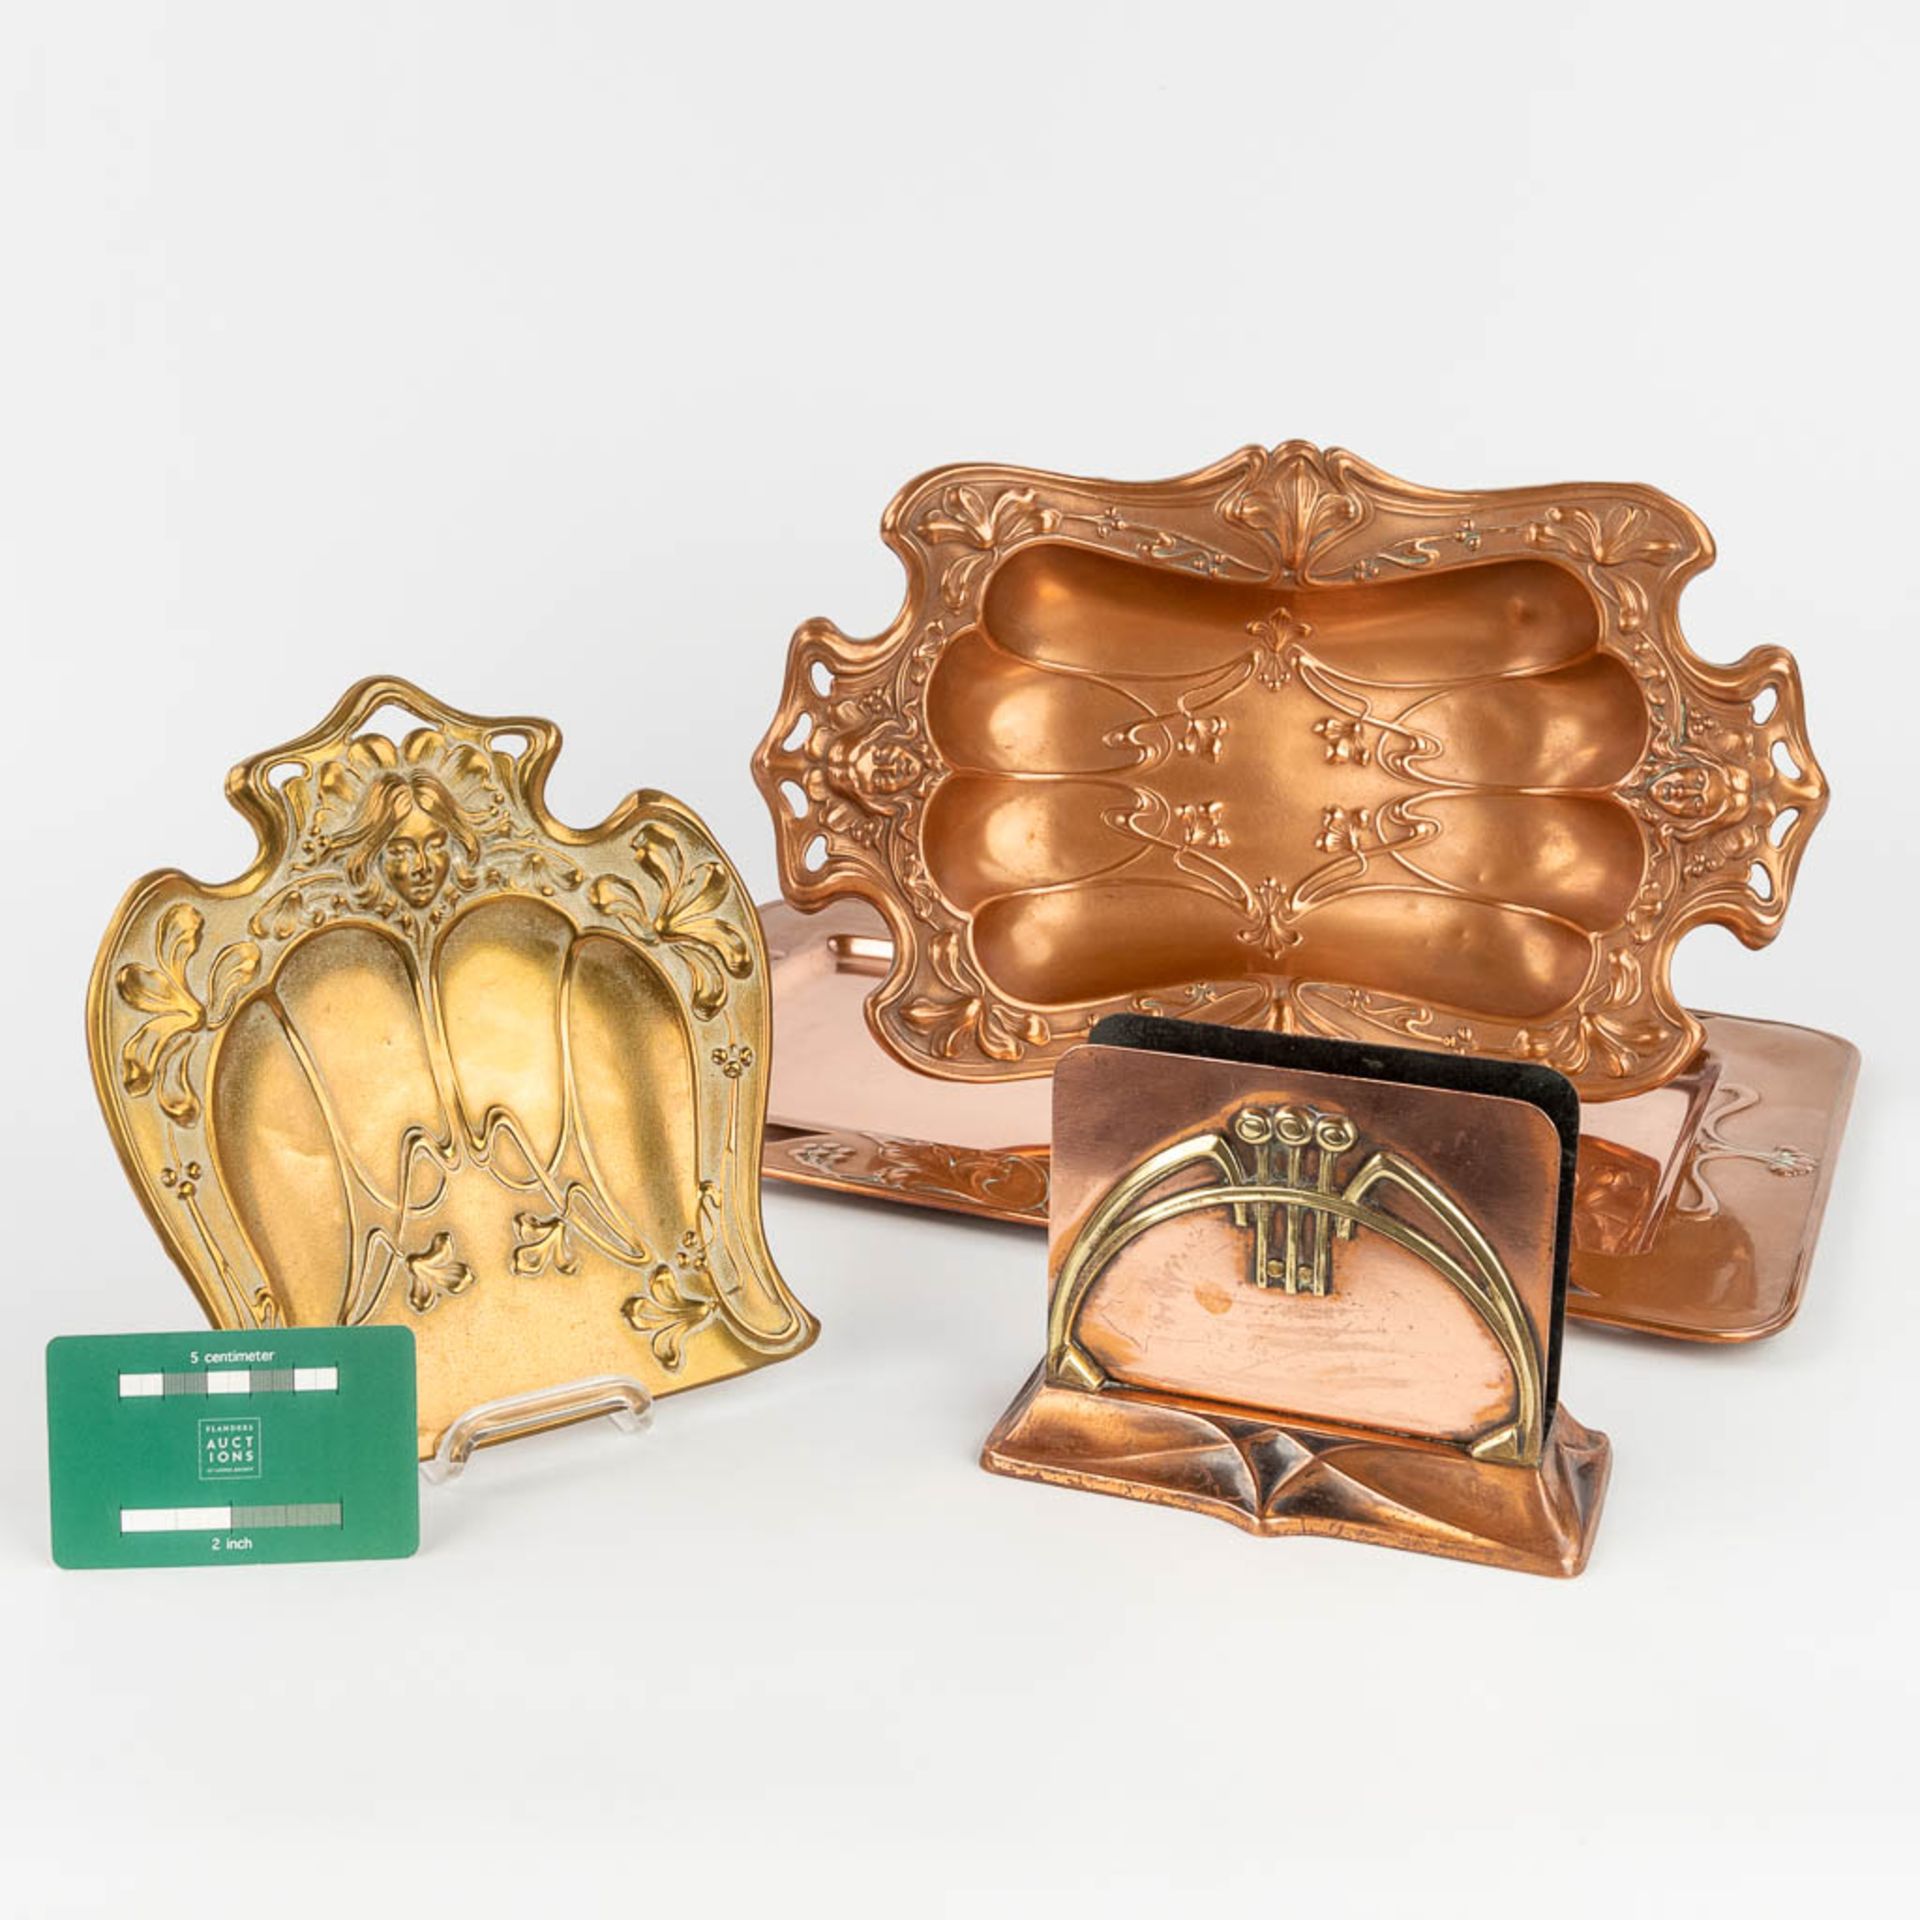 A collection of trays and table accessories made of copper in art nouveau style (L:43 x W:27 cm) - Bild 2 aus 17